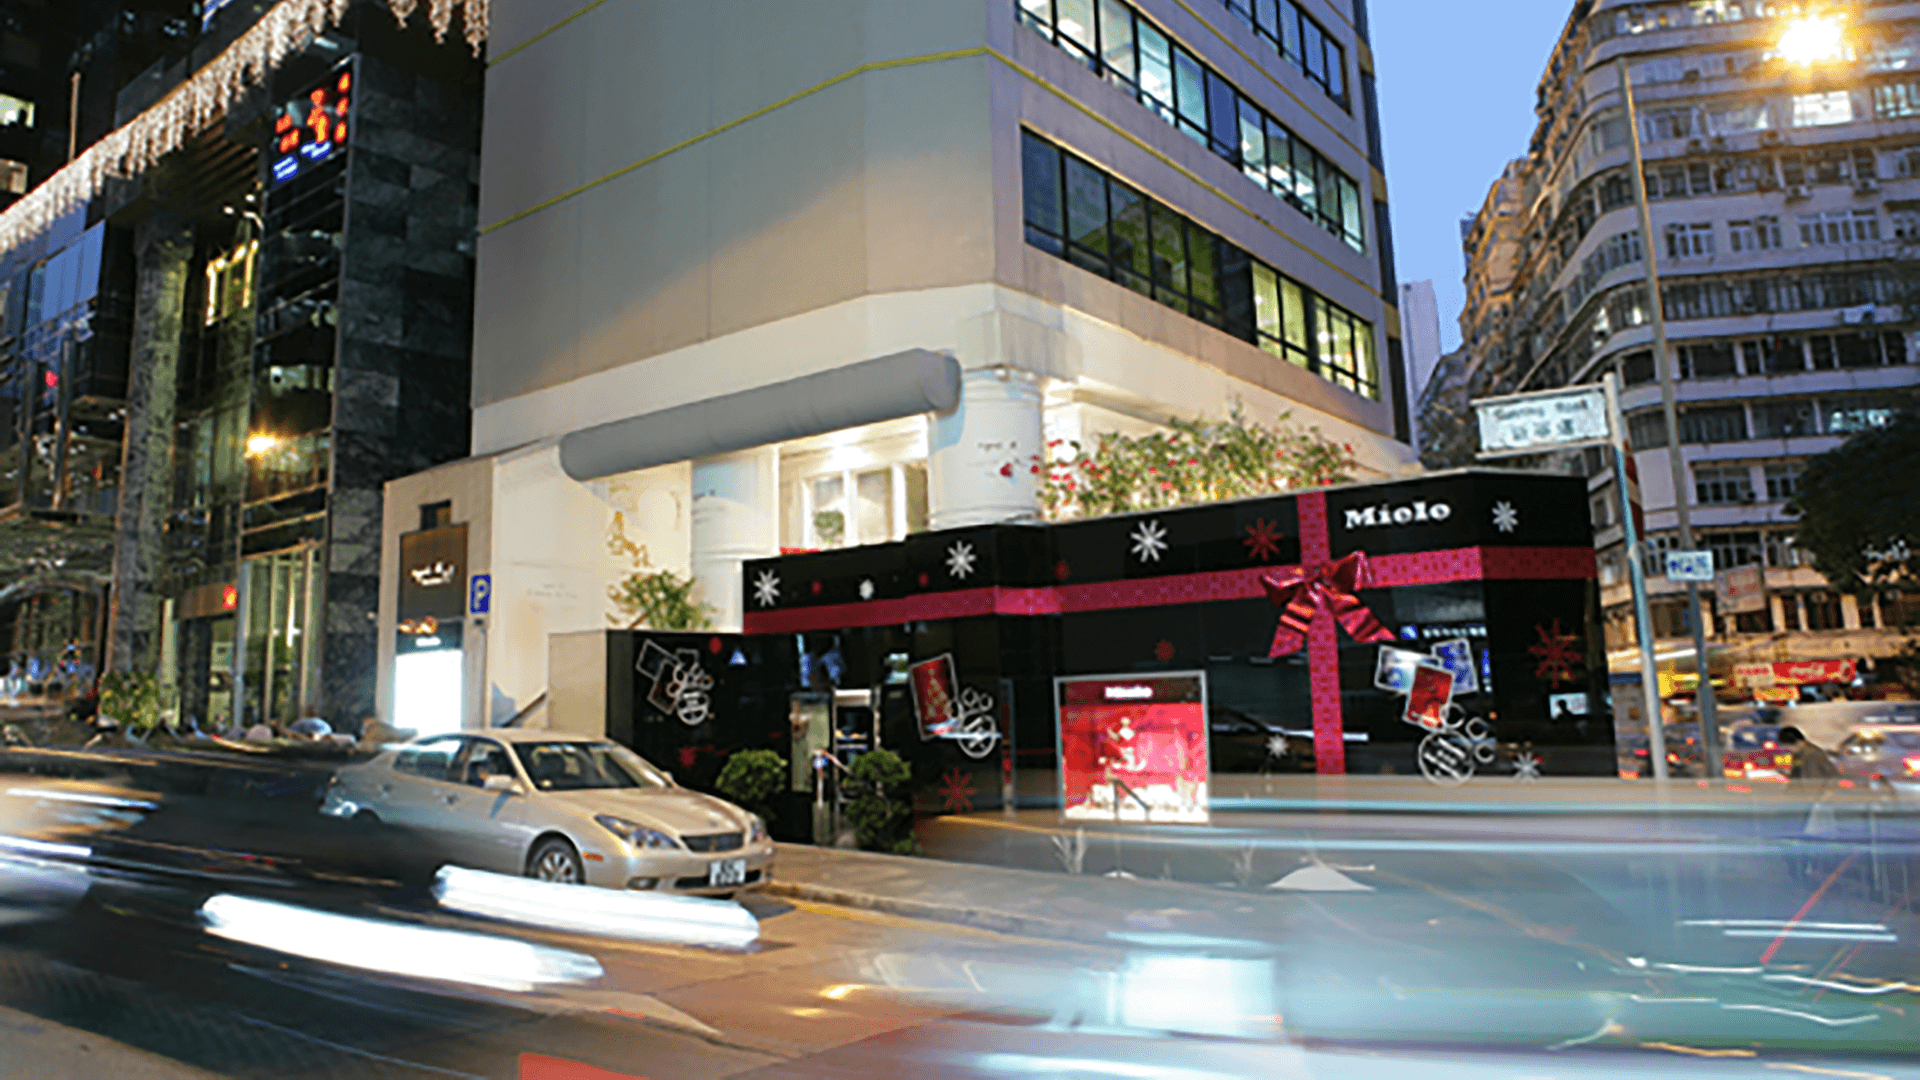 Brand Building for MIELE - Flagship Store